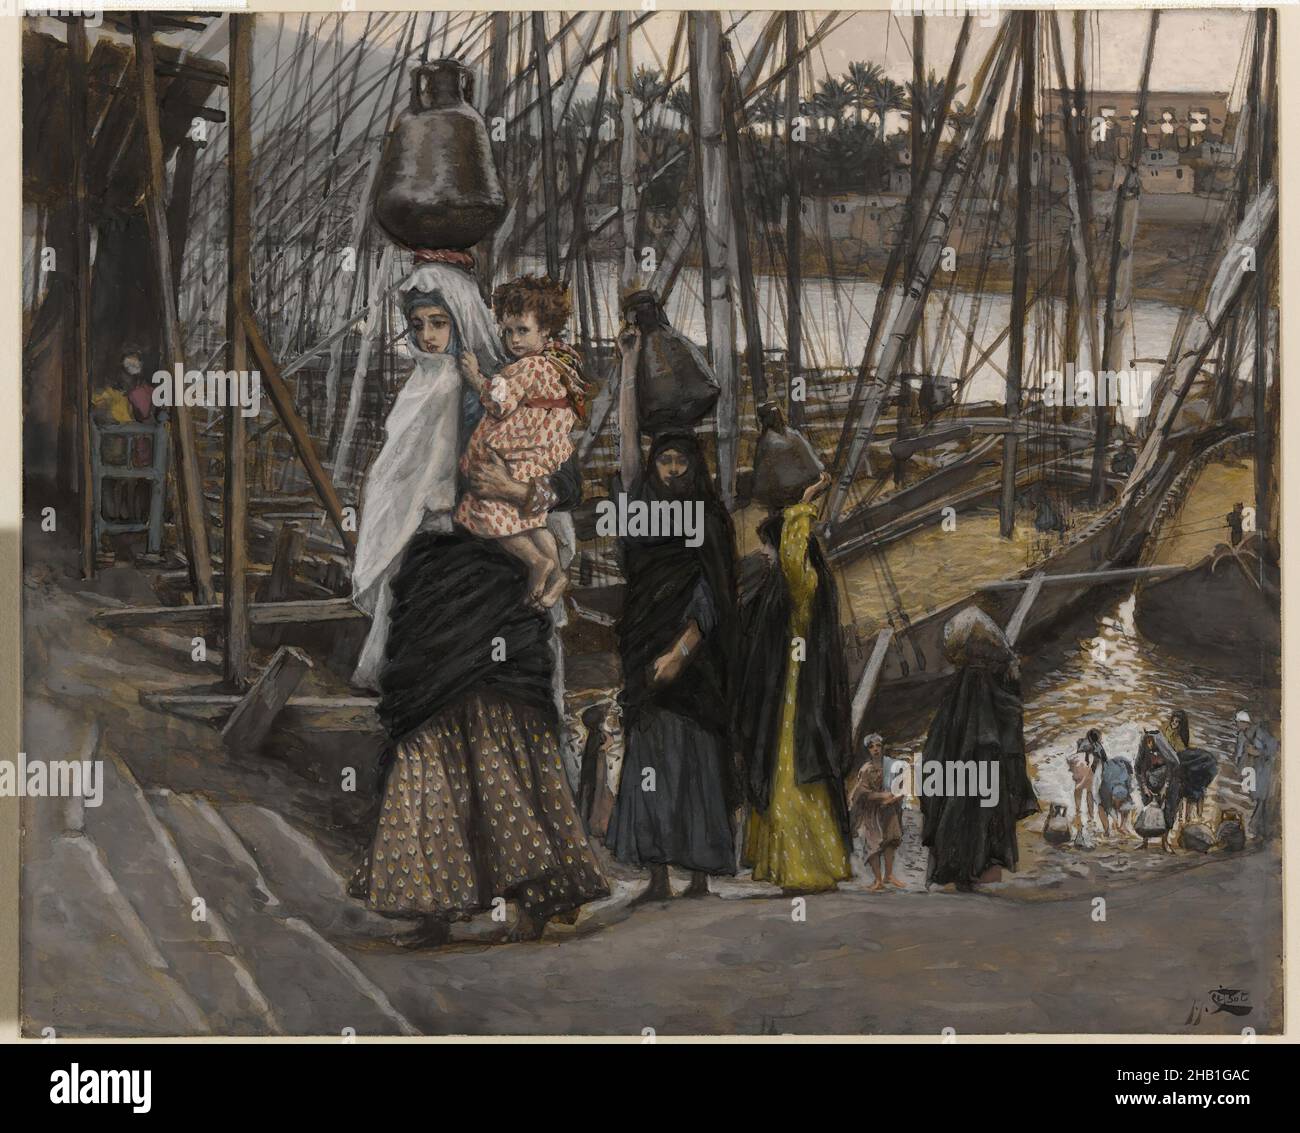 The Sojourn in Egypt, Le séjour en Égypte, The Life of Our Lord Jesus Christ, La Vie de Notre-Seigneur Jésus-Christ, James Tissot, French, 1836-1902, Opaque watercolor over graphite on gray wove paper, France, 1886-1894, Image: 6 11/16 x 8 3/16 in., 17 x 20.8 cm, Bible, Biblical, Catholicism, children, Christ, Christianity, egypt, escape, french, james tissot, Jesus, journey, Mary, Matthew 2:15, New Testament, Religion, Religious, sea, ship, sojourn, Tissot, travel, veil, water, women Stock Photo